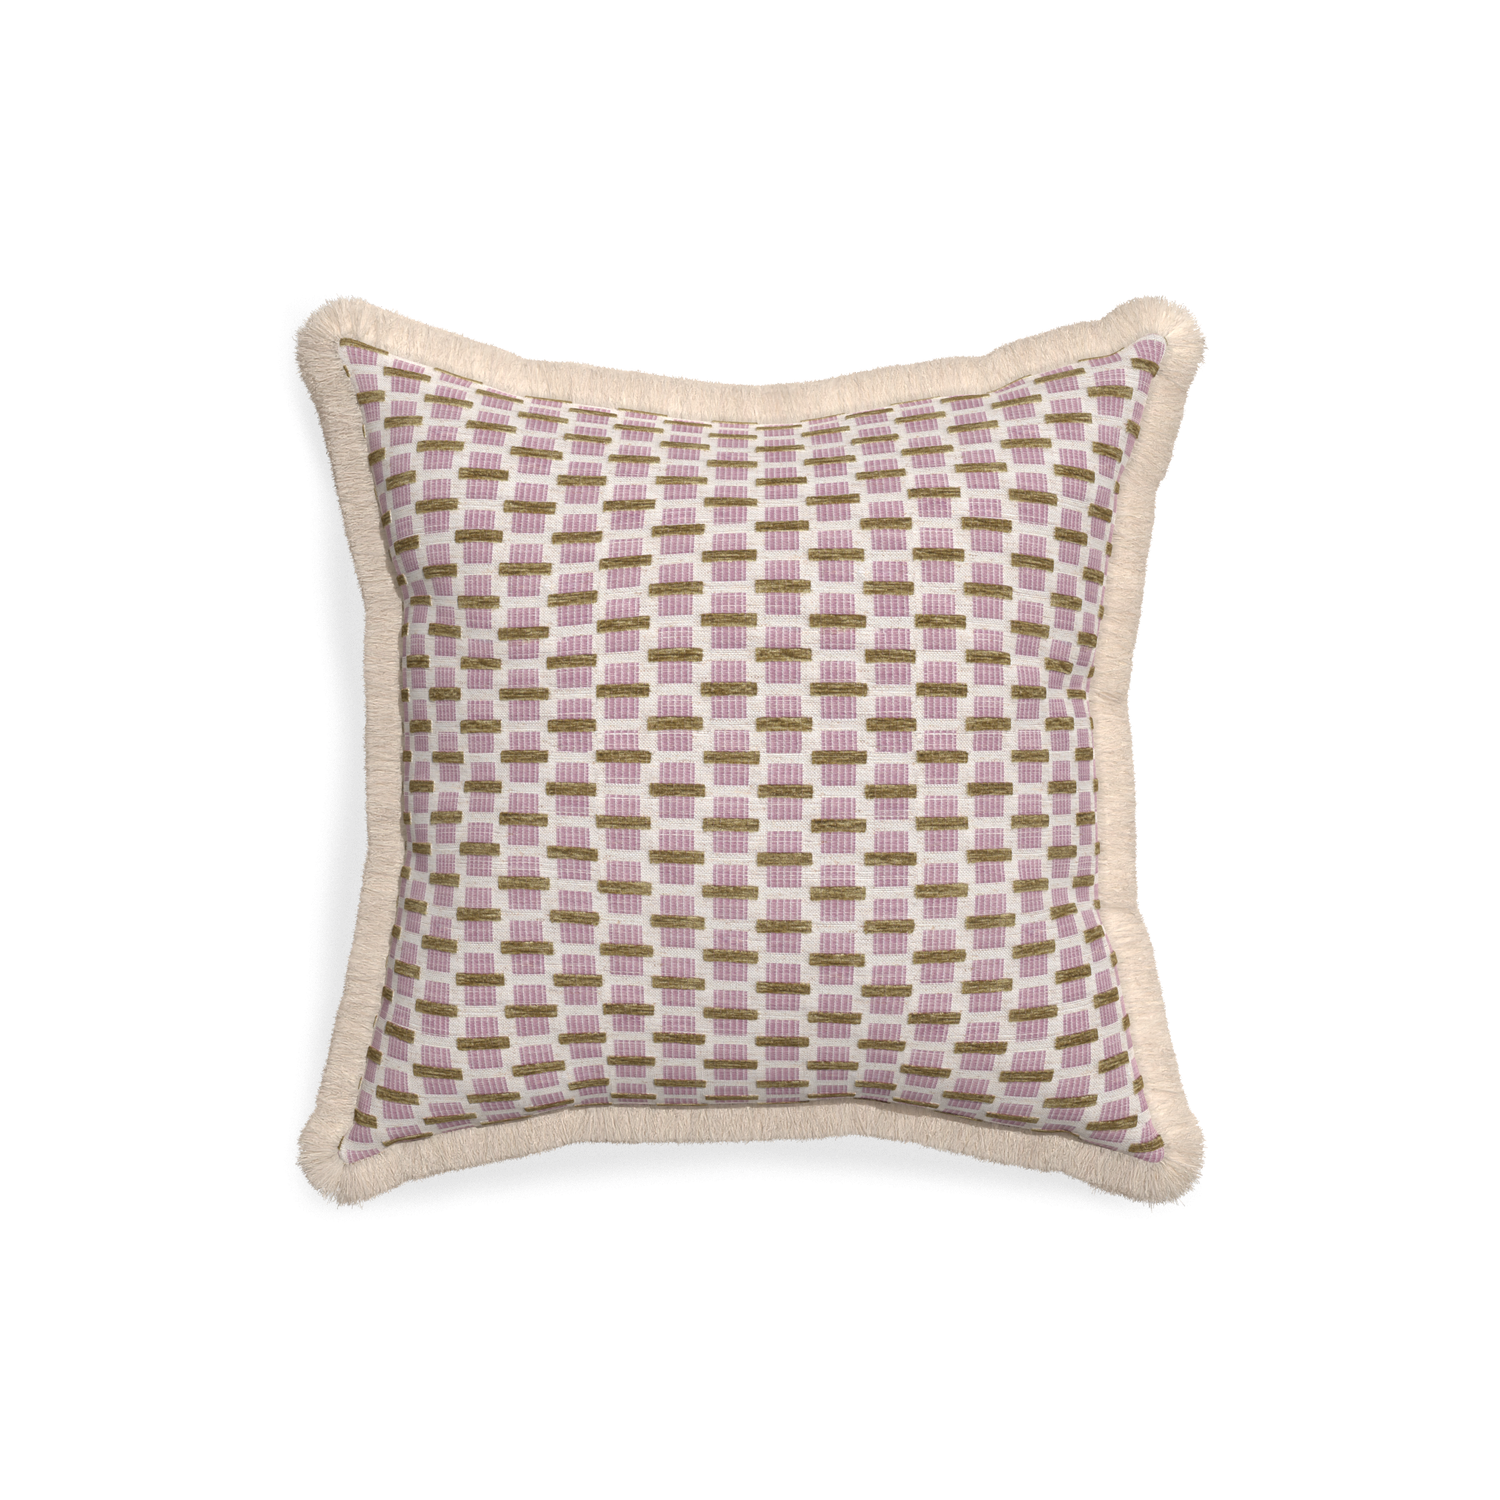 18-square willow orchid custom pink geometric chenillepillow with cream fringe on white background